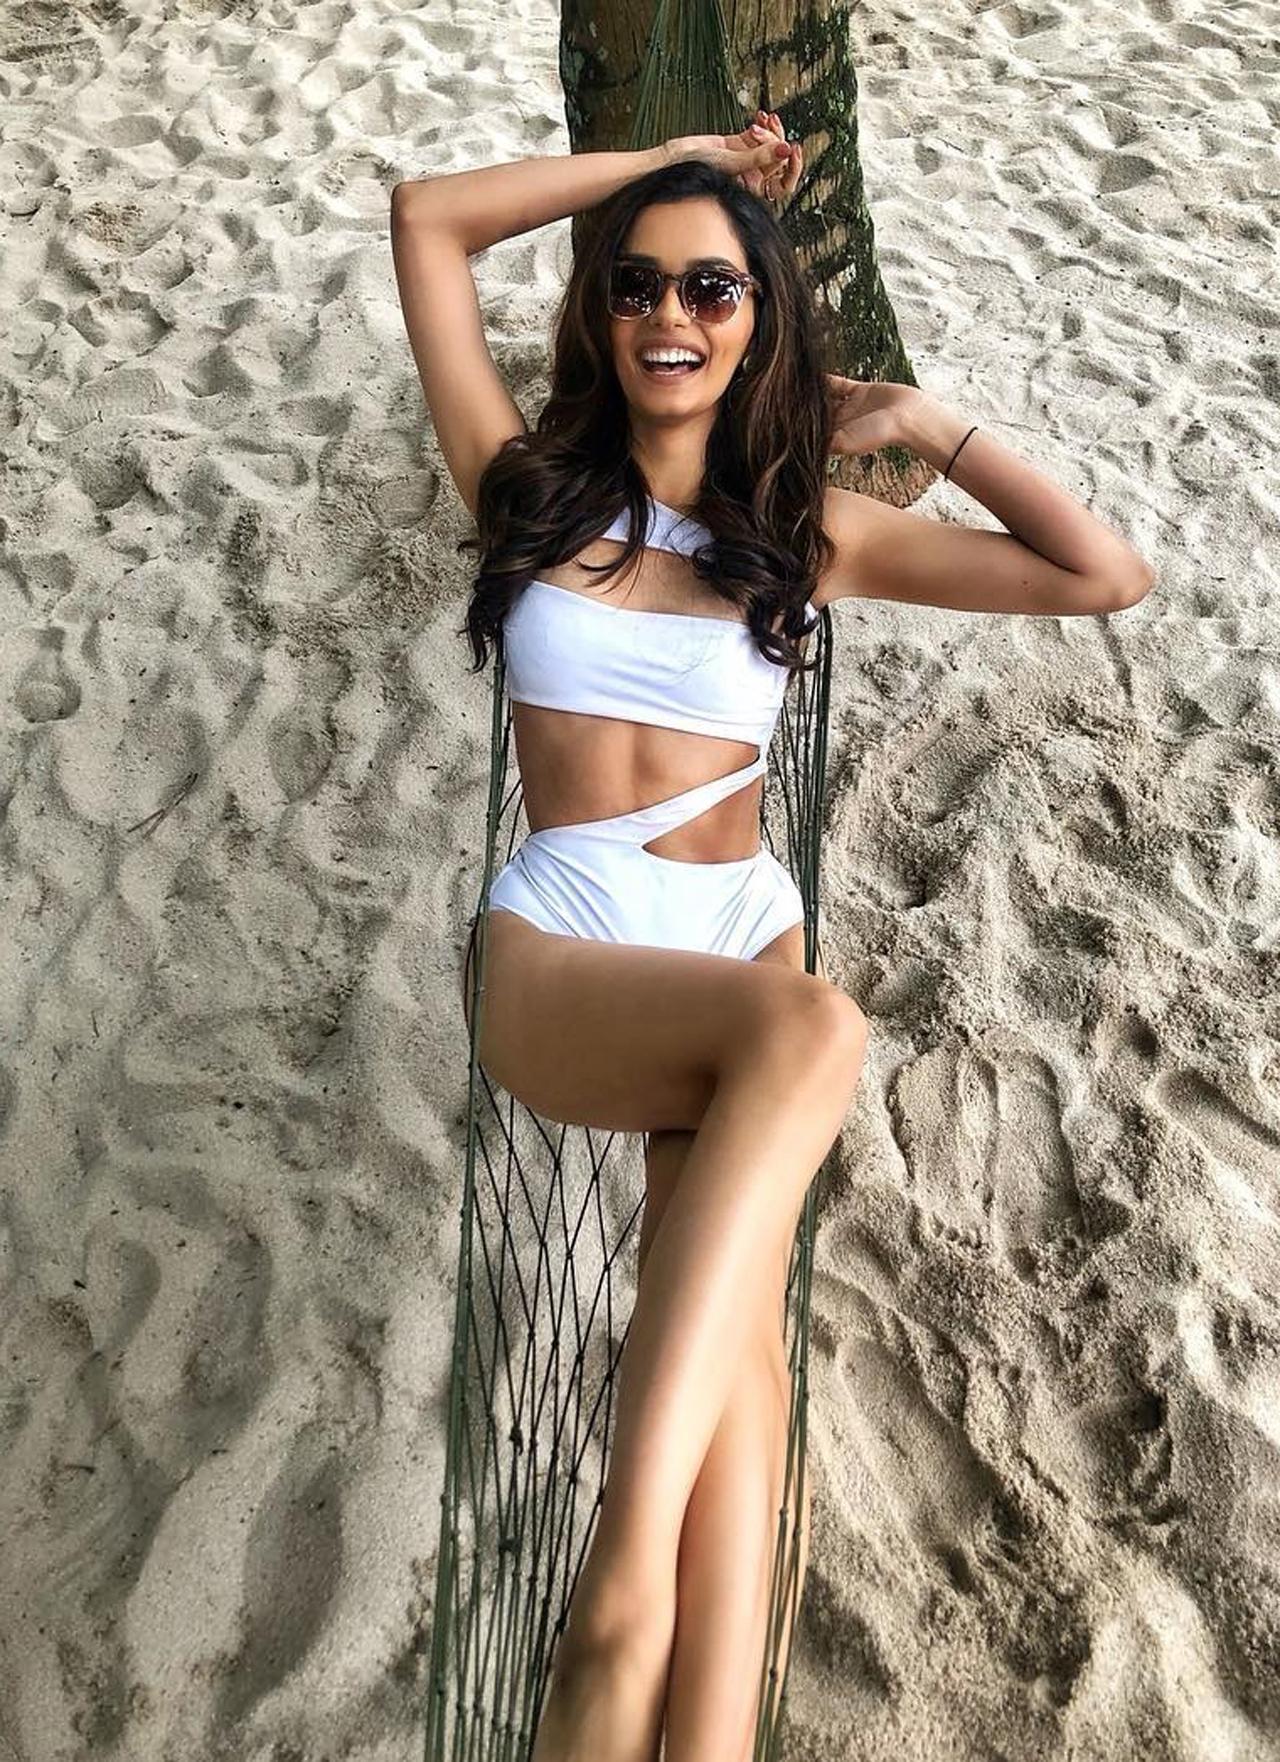 China
How many from Bollywood have holidayed in China? Manushi has. She also poses in a white swimsuit and looks ravishing. She writes in Chinese too. This is how it goes- 